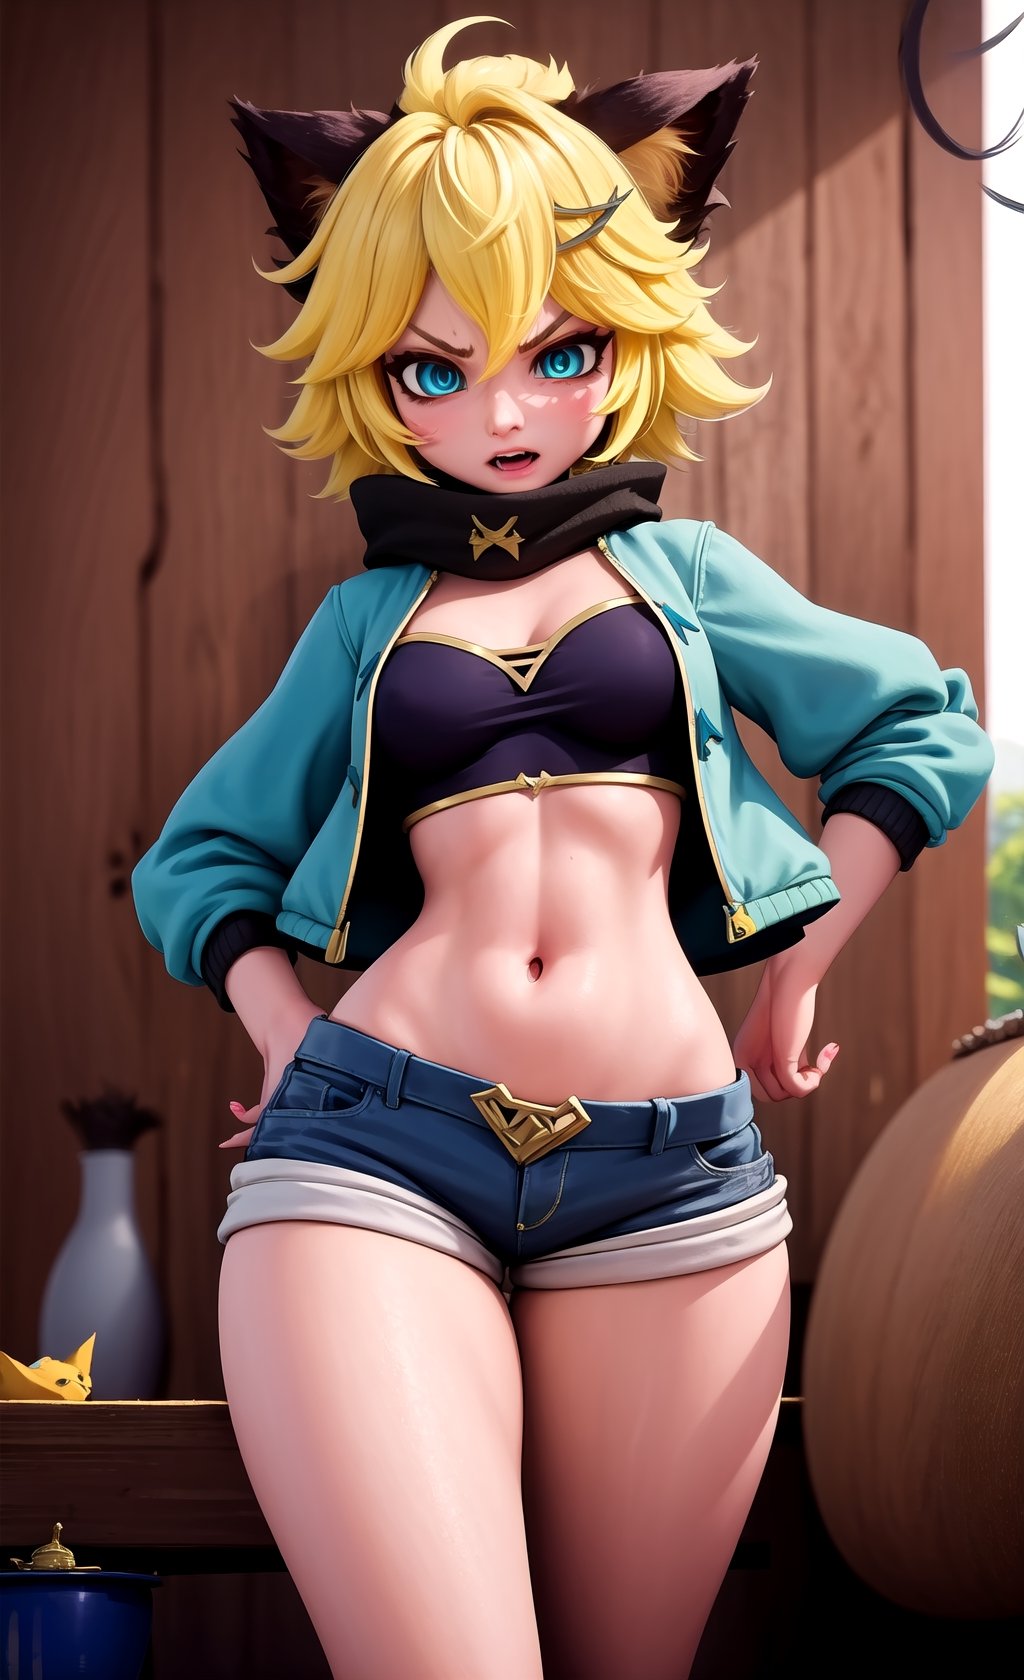 (masterpiece, top quality), intricate details, ((slim)), beautiful girl, 1 woman, (killer), Angry, Yellow hair, white skin, light blue eyes, cat ears, very detailed, messy hair, jacket details, shorts, pictures,